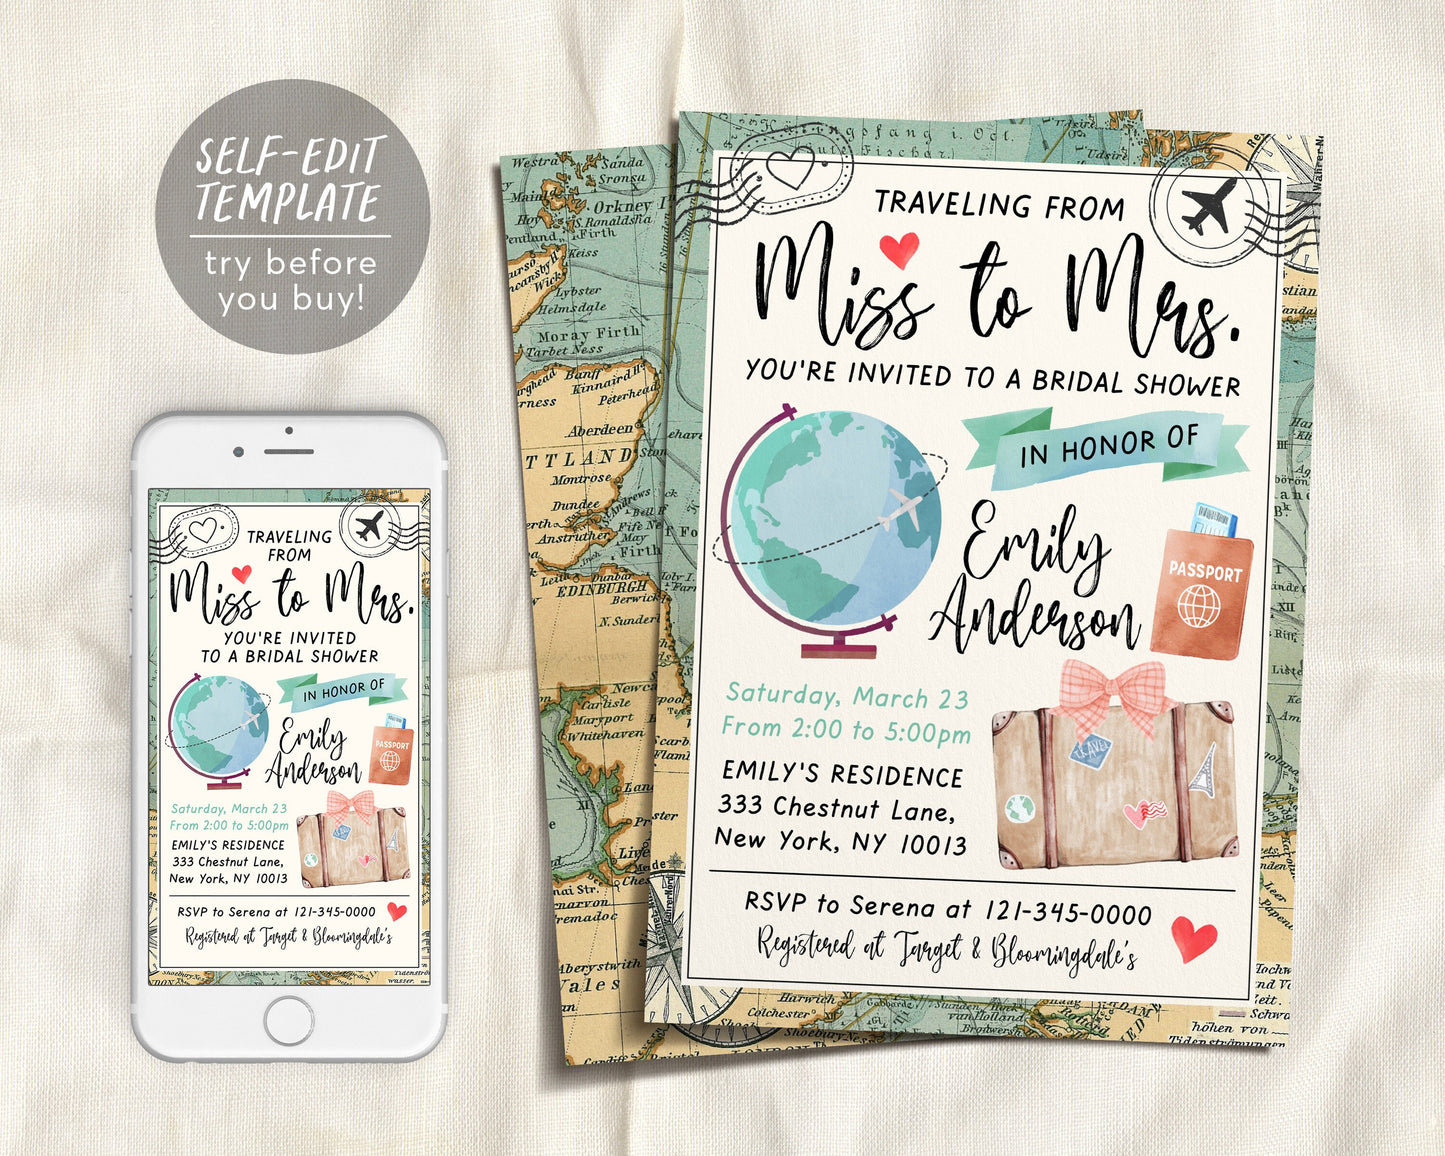 Traveling from Miss to Mrs Invitation Editable Template, Travel Bridal Shower Invite Printable, Vintage World Map Globe Passport Suitcase